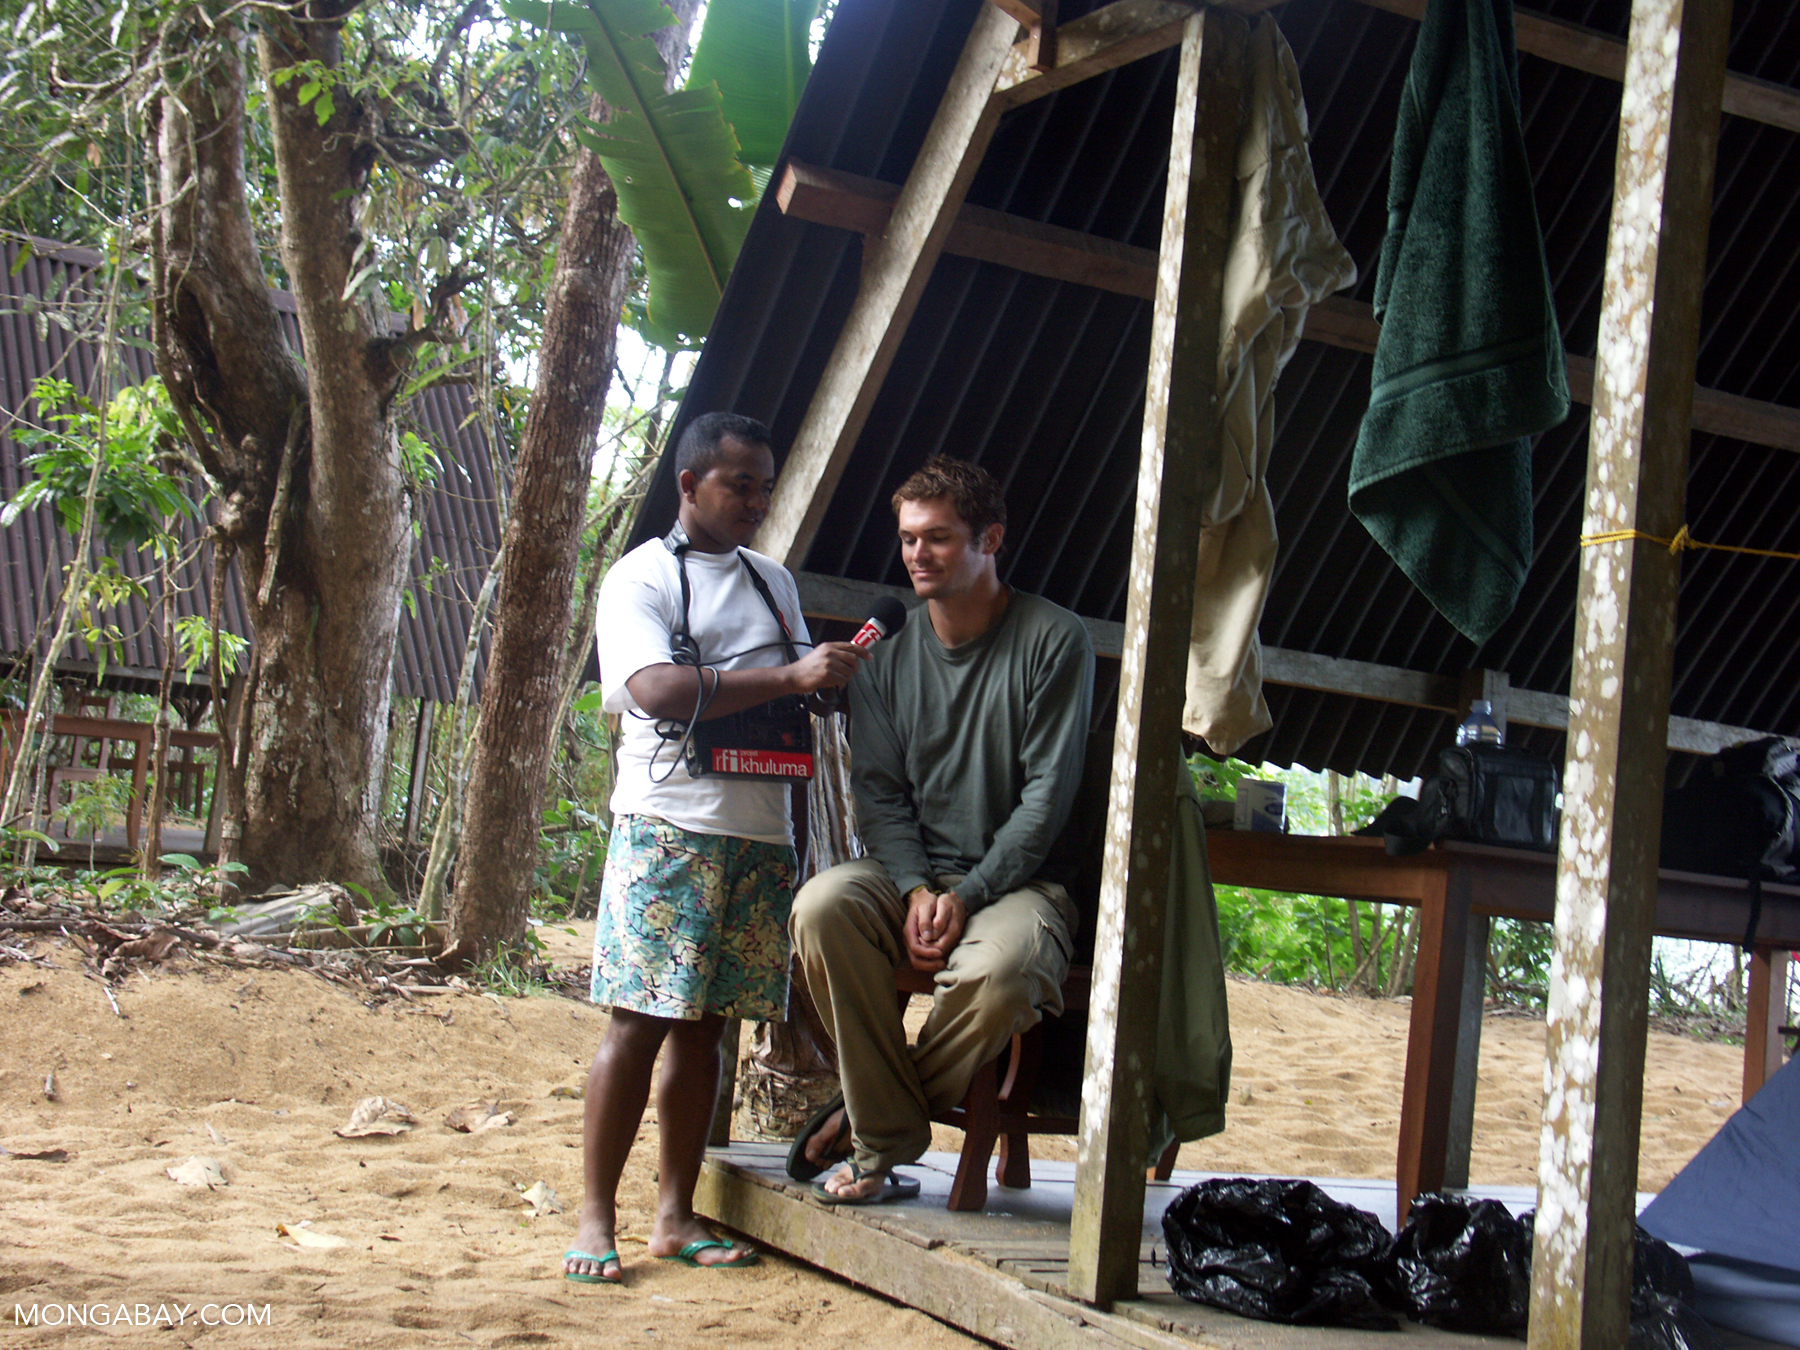 A Malagasy journalist conducting an interview in Madagascar.